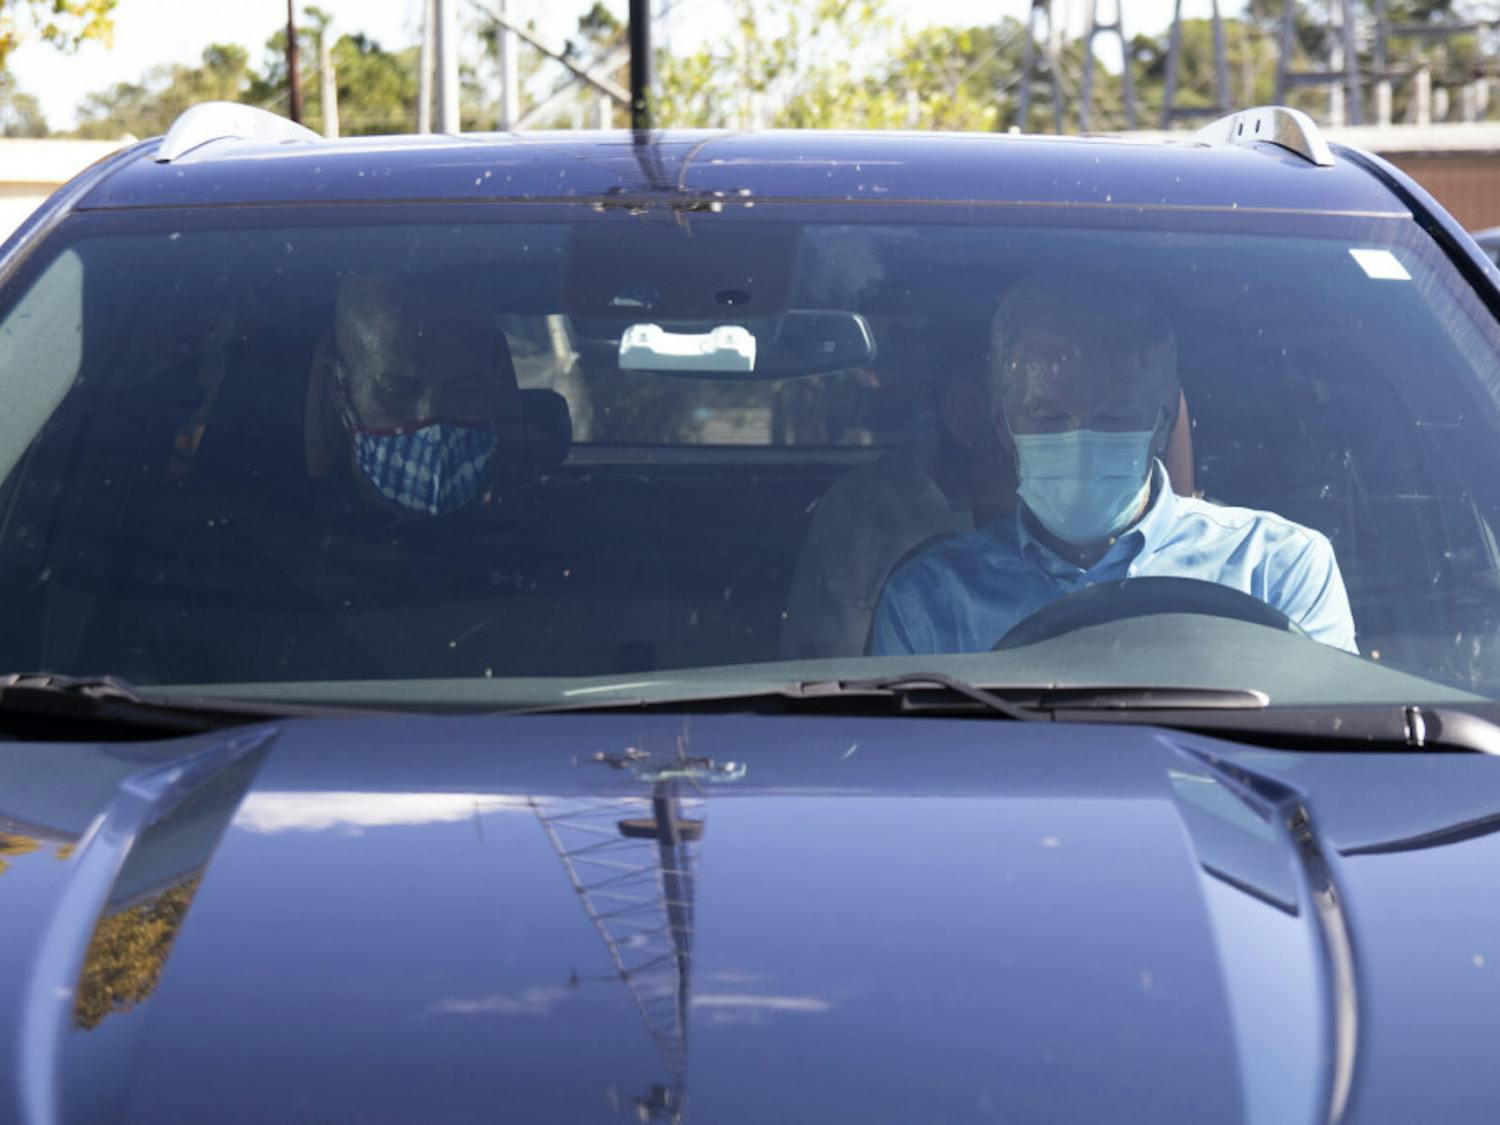 Senator Cory Booker and former Senator Bill Nelson sit in a car, preparing to leave the parking lot after the “Good Trouble” rally at Depot Park on Saturday, Oct. 31, 2020.